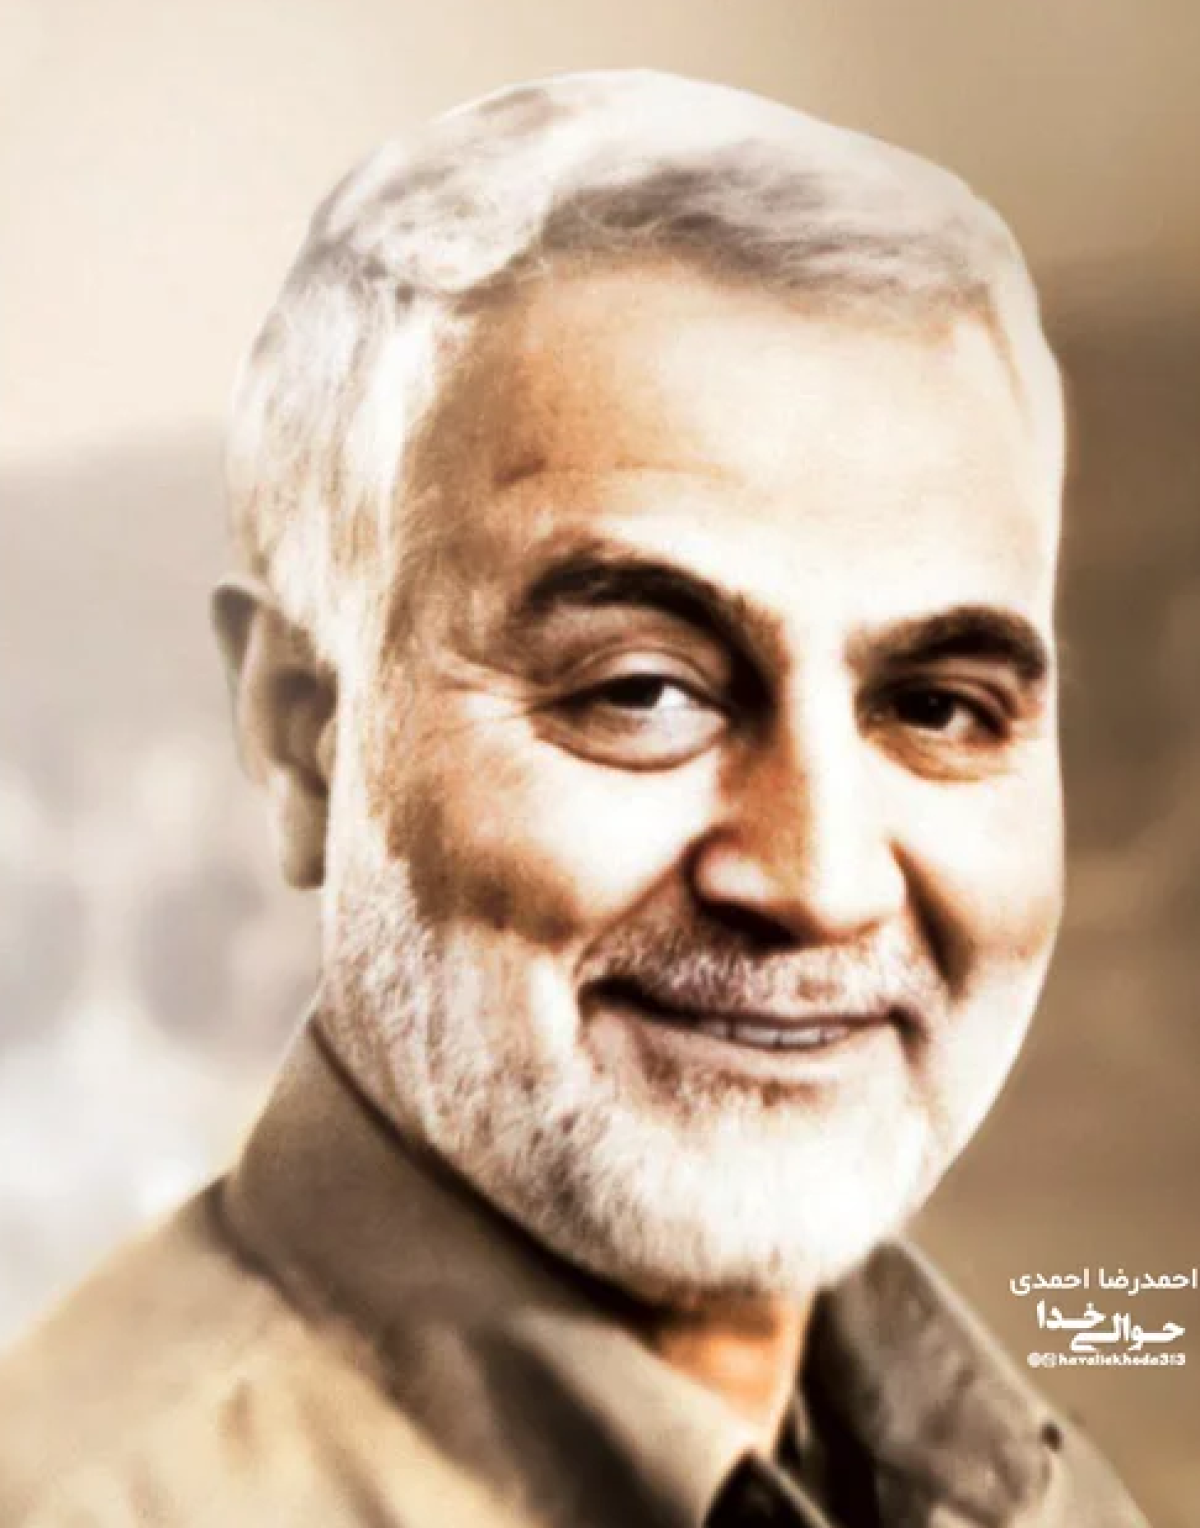  How did Yemenis move after Soleimani’s martyrdom?